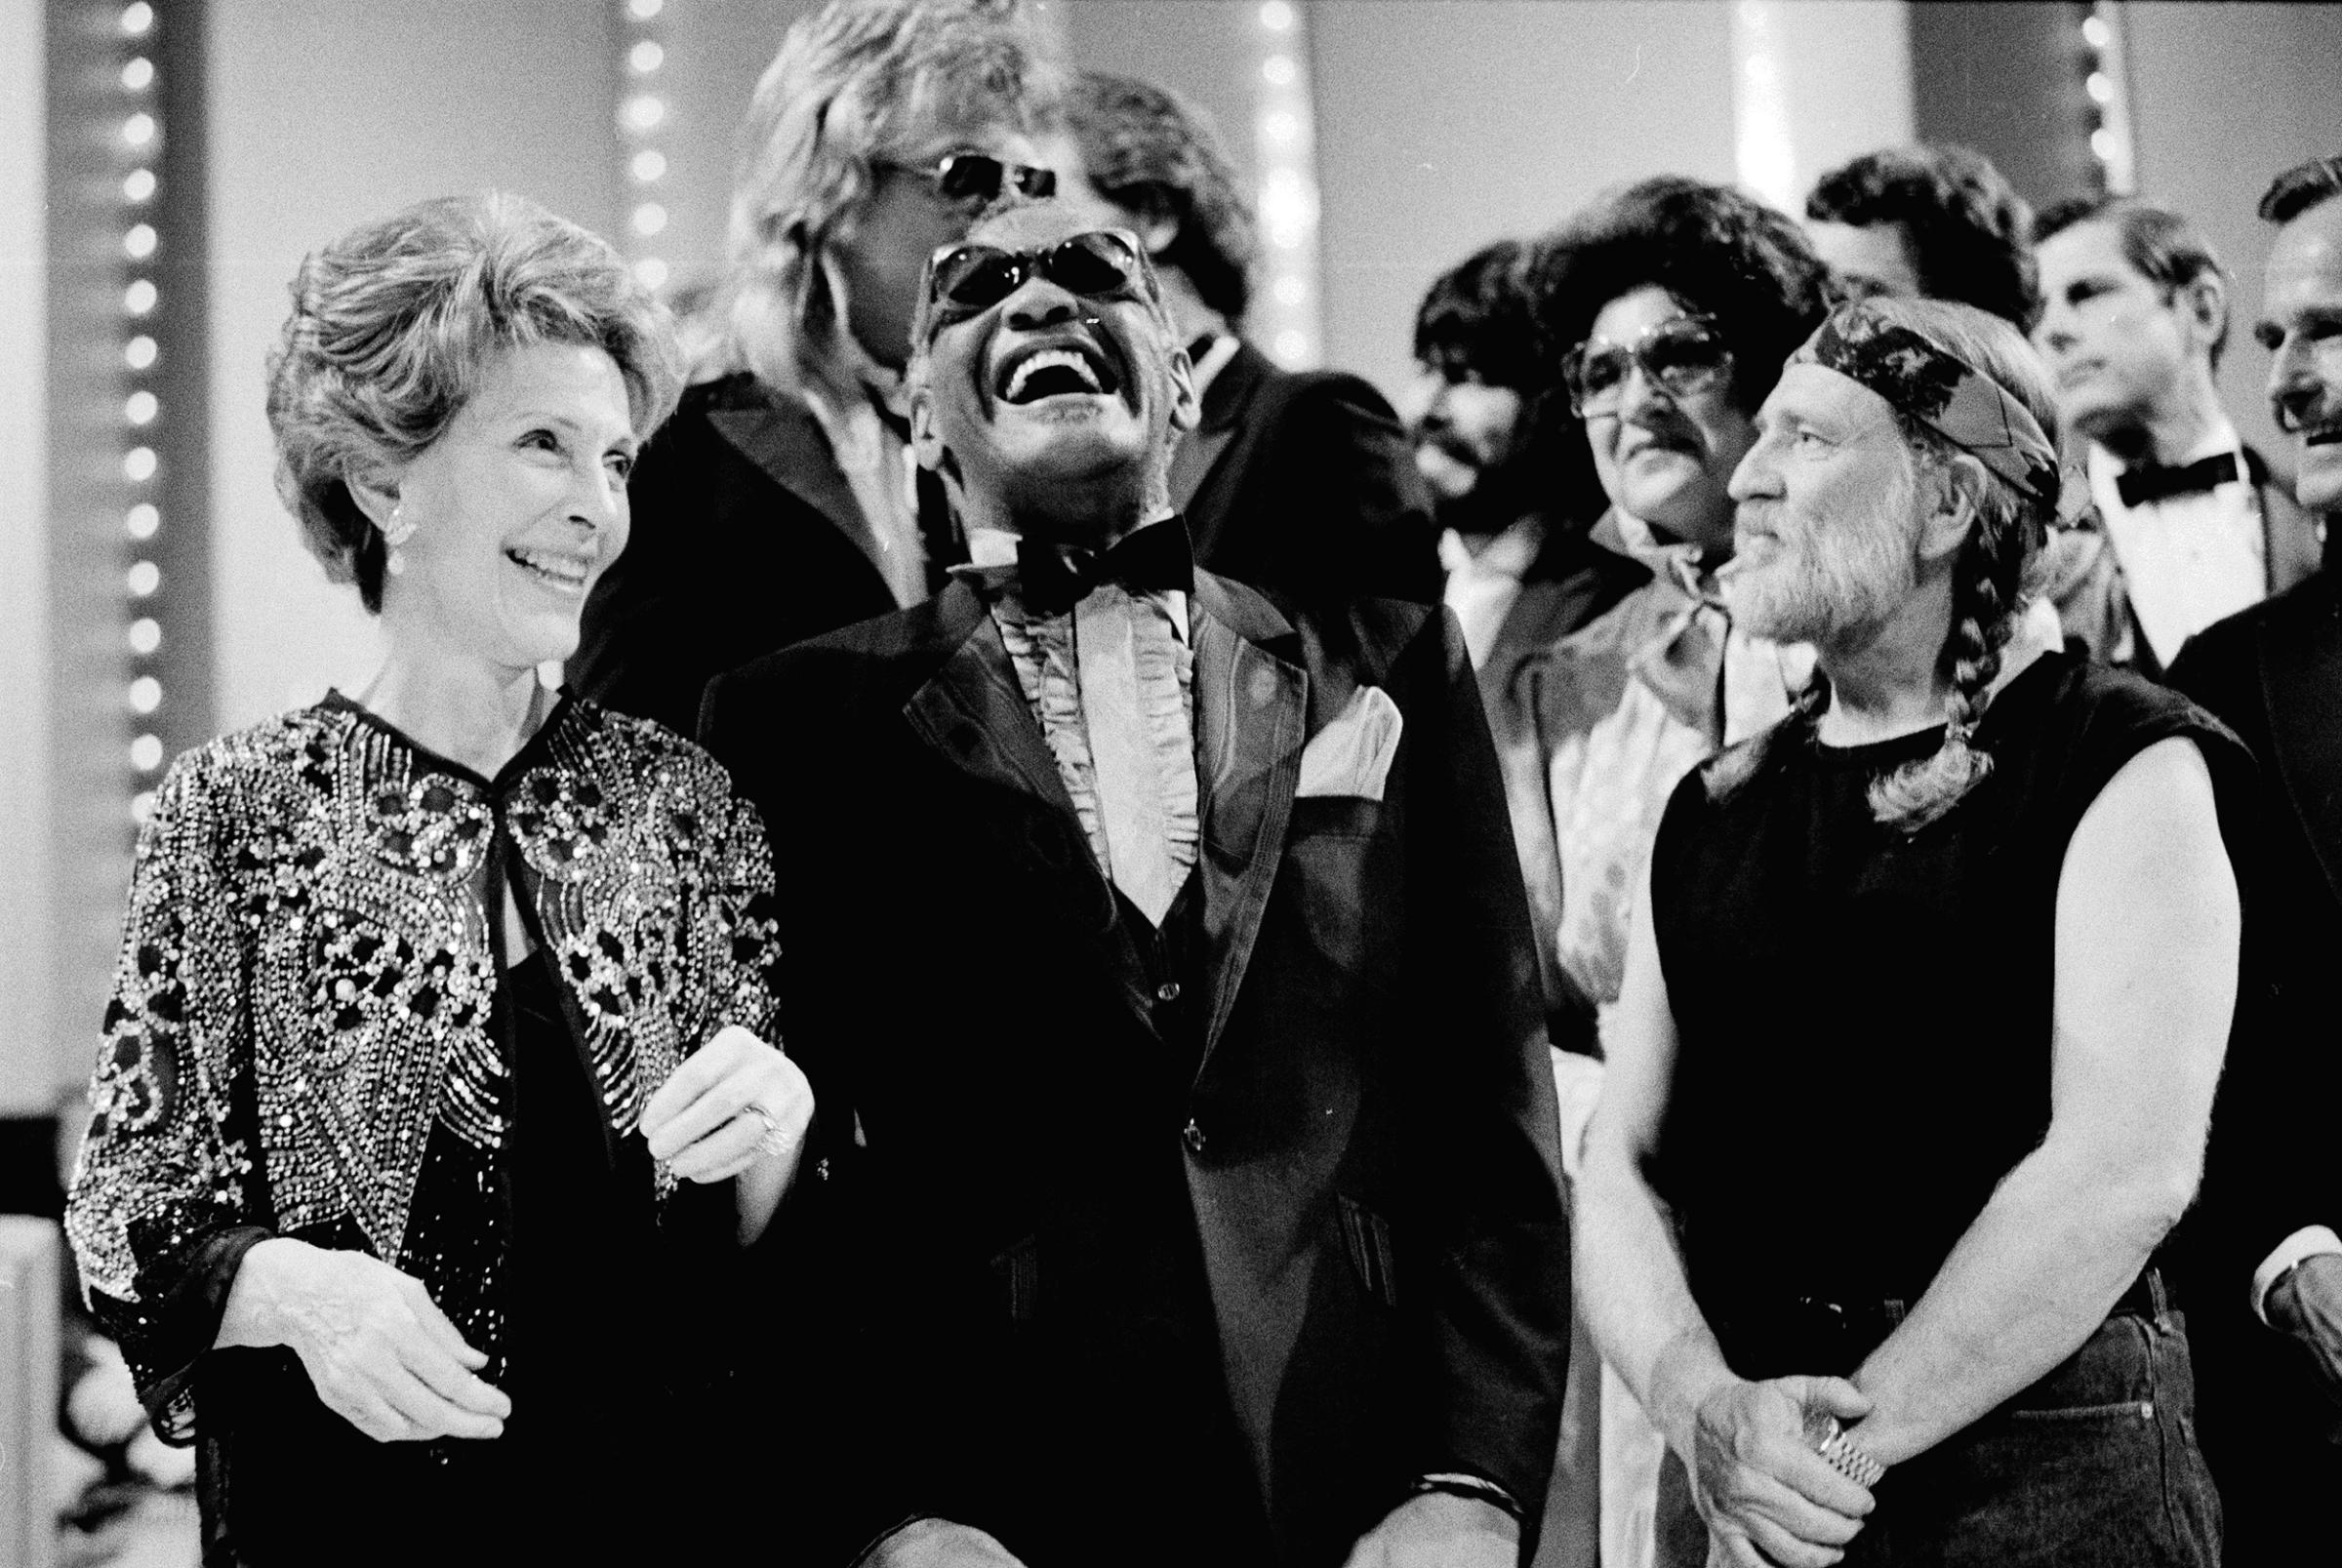 Nancy Reagan gets a laugh with Ray Charles and Willie Nelson and other entertainers at a salute to country music at Constitution Hall in Washington on March 16, 1983.